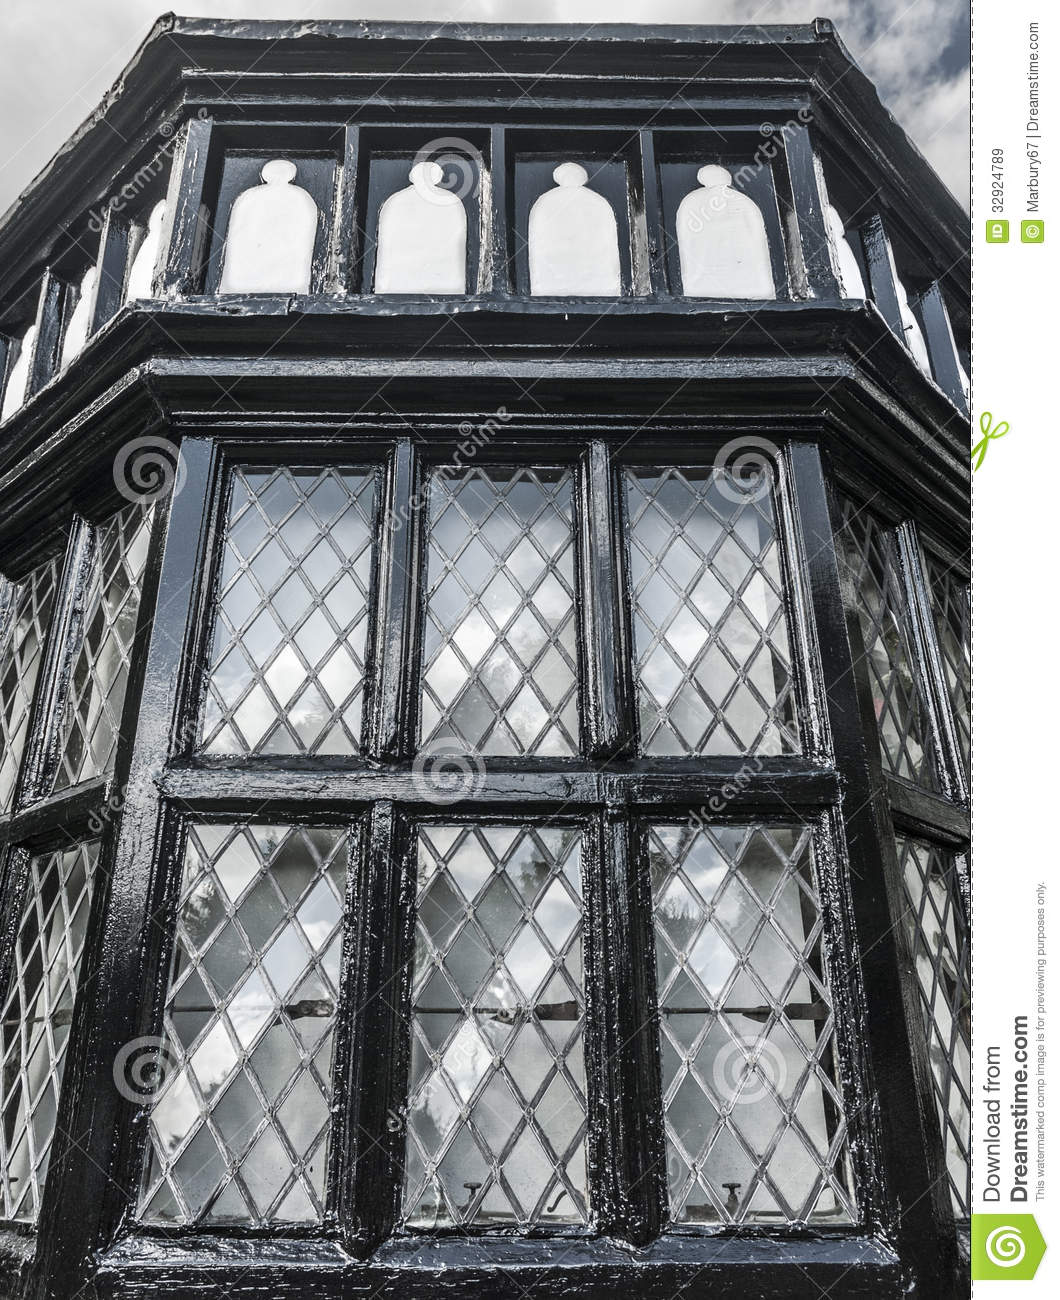 Tudor Bay Window Of An Historic Country House In Gawsworth Cheshire